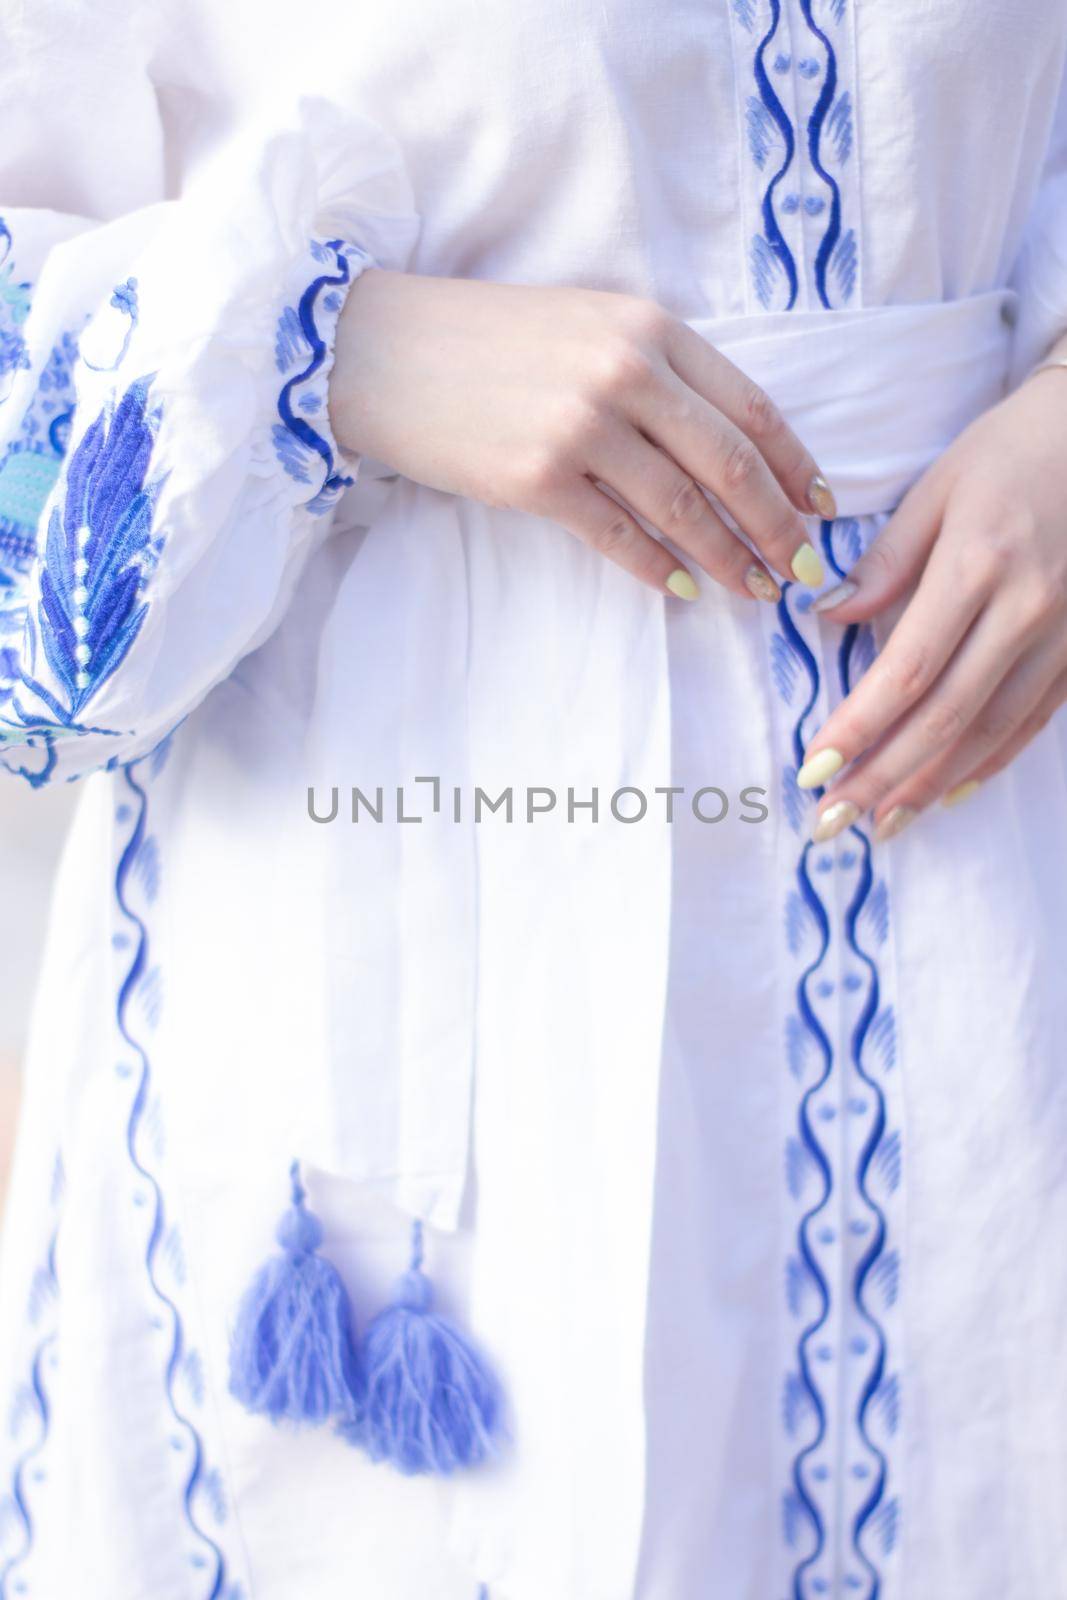 close up of national traditional ukrainian clothes. details of woman in embroidered dress. unrecognizable person by oliavesna